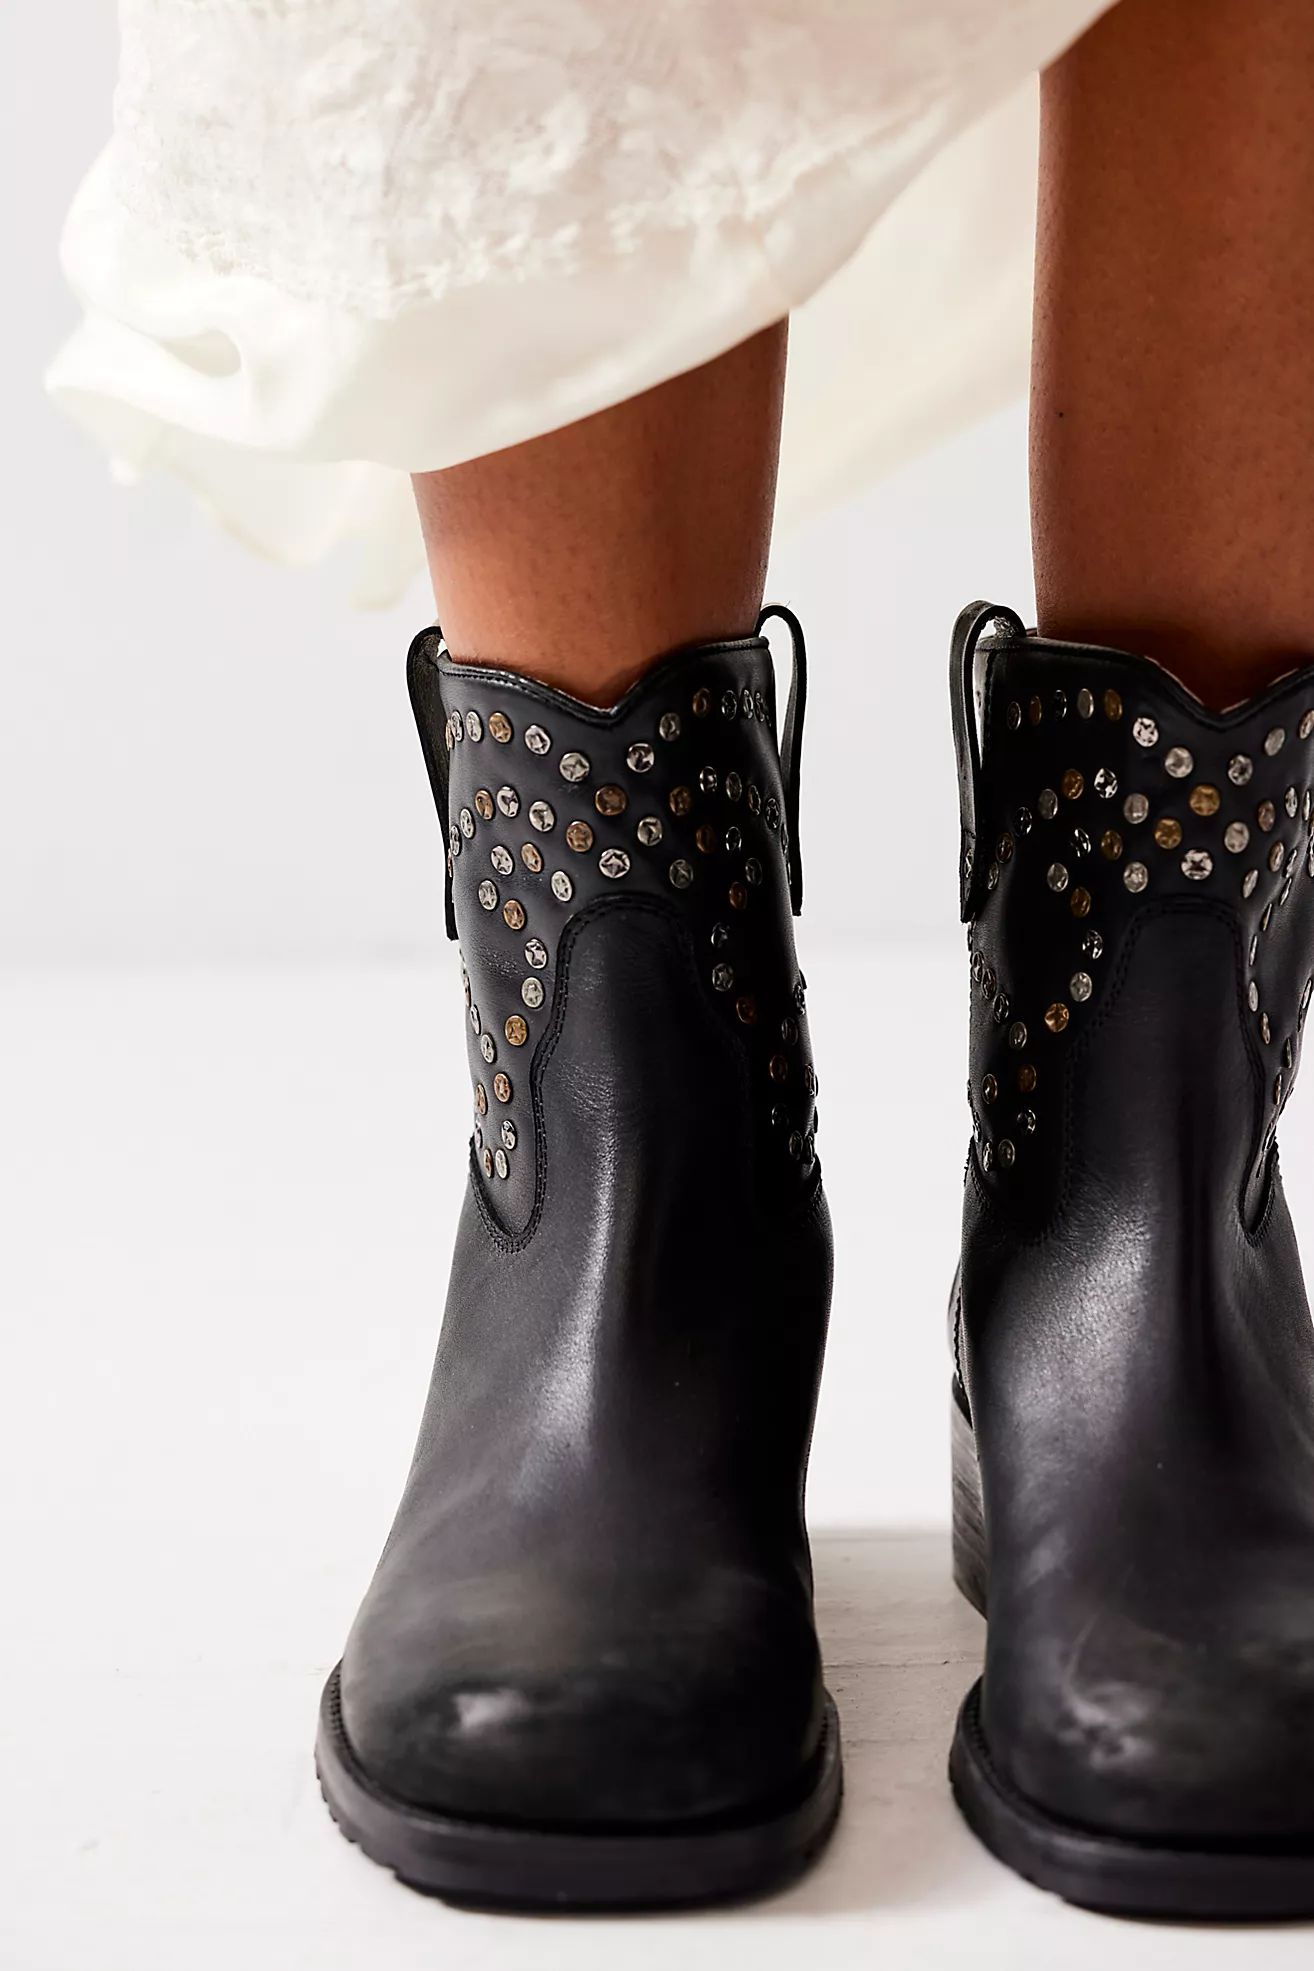 Harmony Studded Ankle Boots | Free People (Global - UK&FR Excluded)